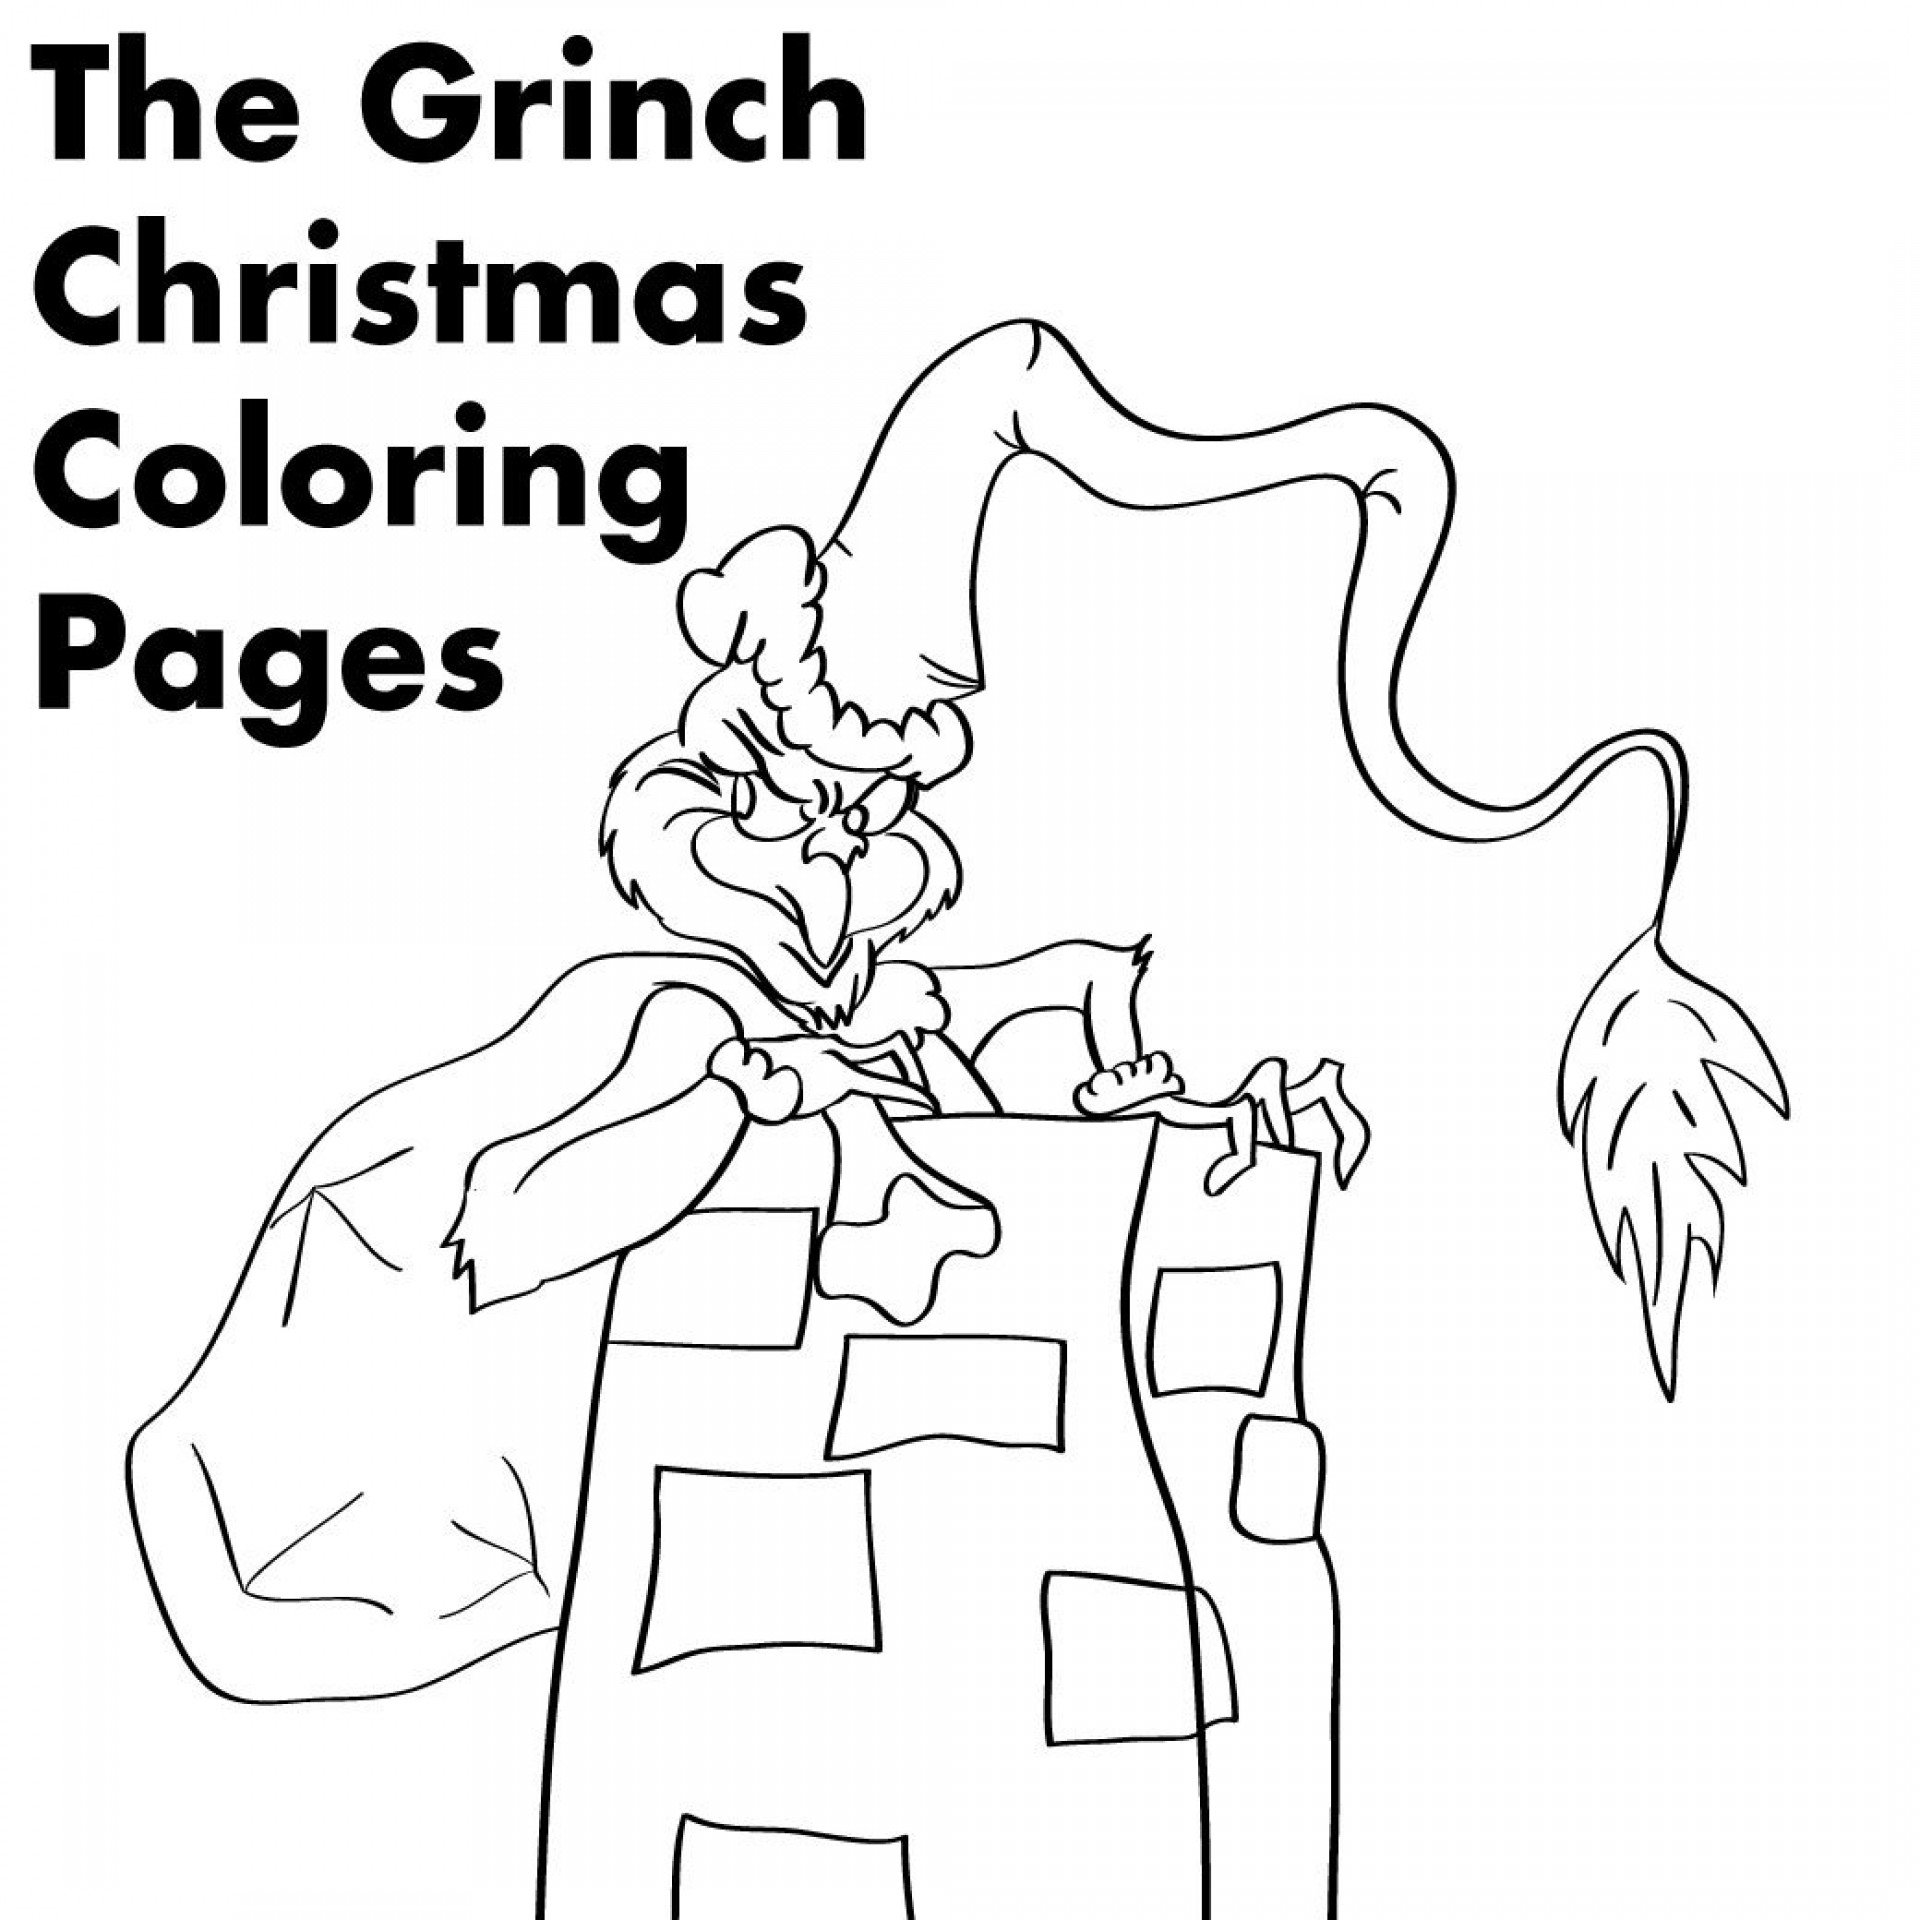 Word Coloring Page Generator 045 Printable Word Coloring Pages Freehristmas Activities Preschool